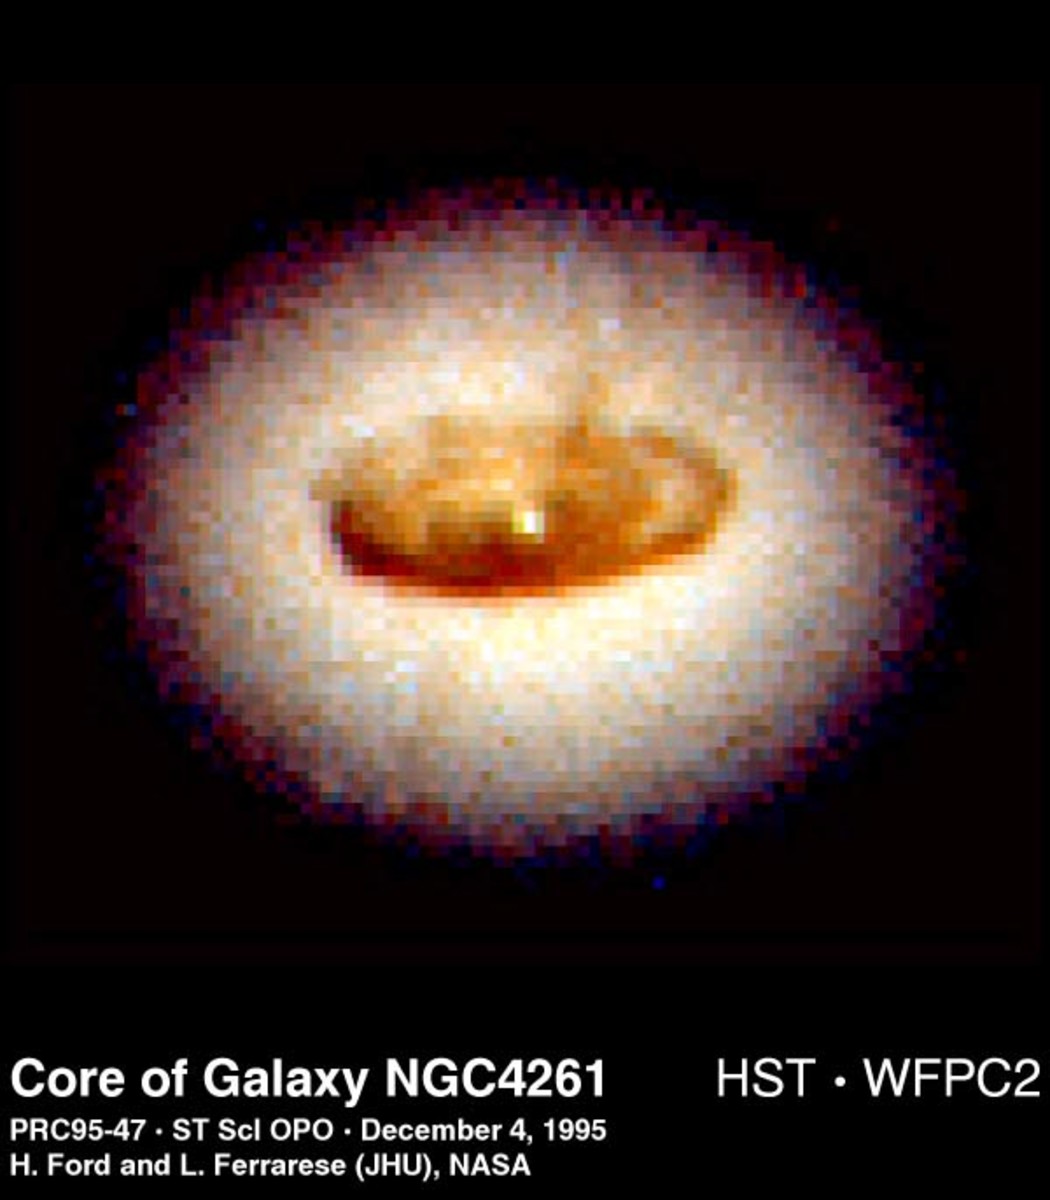 The Hubble Space Telescope images the swirling disk, stars, and gas around a supermassive black hole "1.2 billion times the mass of the Sun, yet concentrated into a region of space not much larger than our solar system." Core of Galaxy NGC 4261.